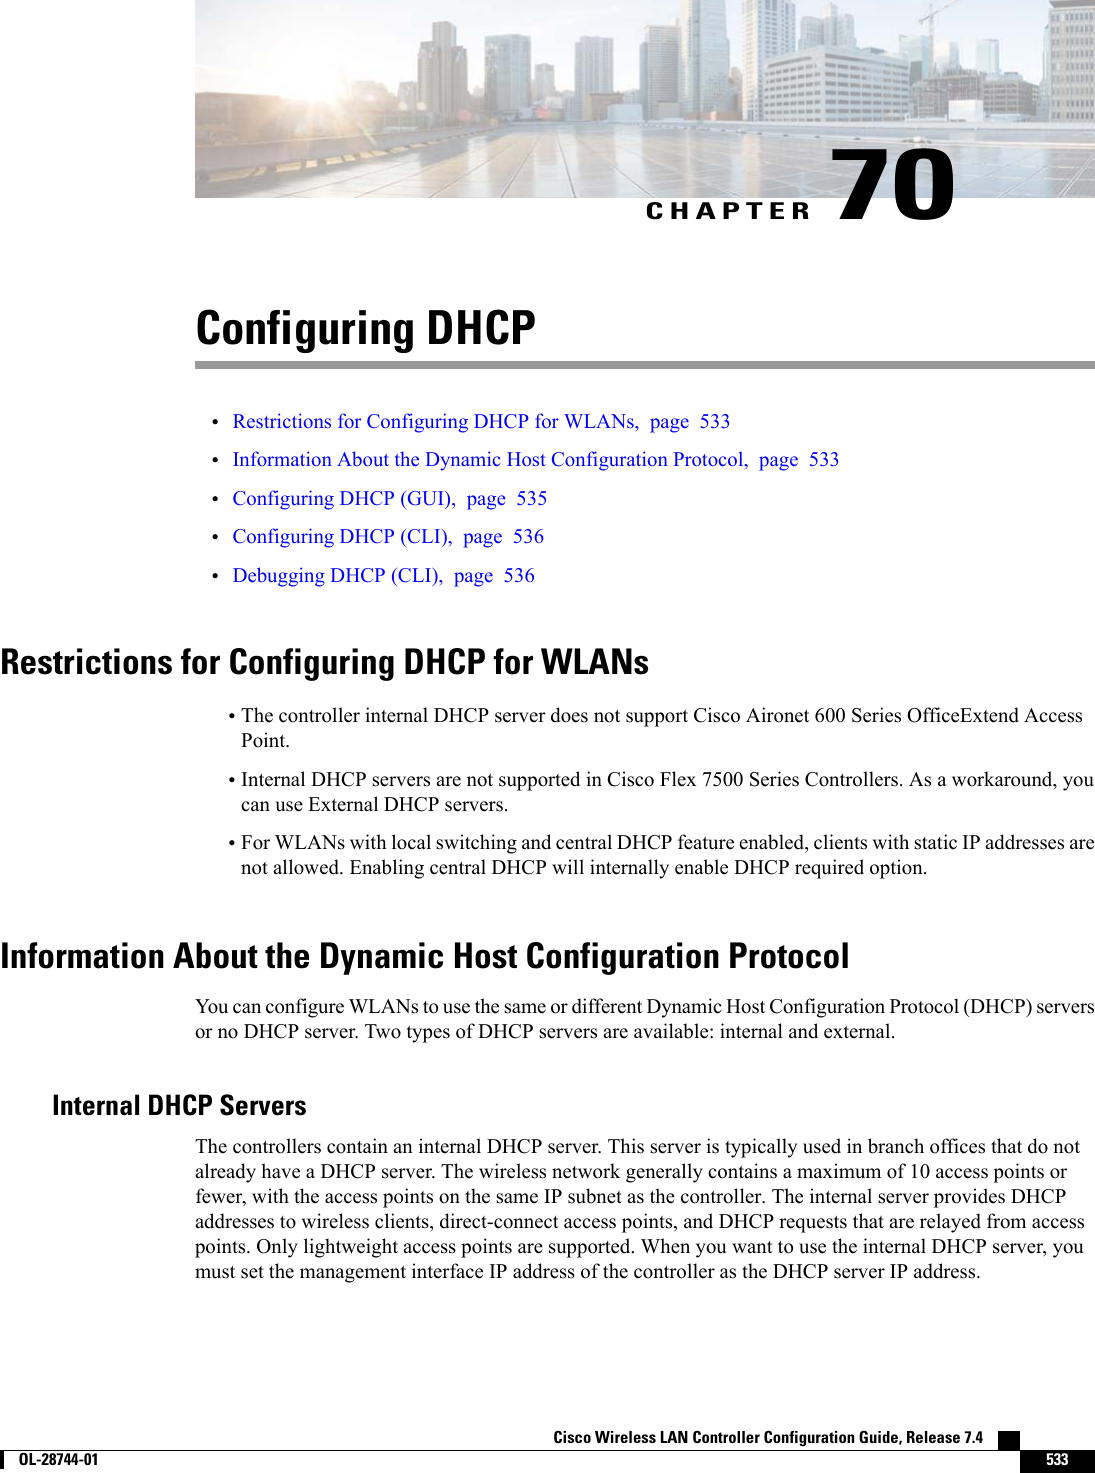 CHAPTER 70Configuring DHCP•Restrictions for Configuring DHCP for WLANs, page 533•Information About the Dynamic Host Configuration Protocol, page 533•Configuring DHCP (GUI), page 535•Configuring DHCP (CLI), page 536•Debugging DHCP (CLI), page 536Restrictions for Configuring DHCP for WLANs•The controller internal DHCP server does not support Cisco Aironet 600 Series OfficeExtend AccessPoint.•Internal DHCP servers are not supported in Cisco Flex 7500 Series Controllers. As a workaround, youcan use External DHCP servers.•For WLANs with local switching and central DHCP feature enabled, clients with static IP addresses arenot allowed. Enabling central DHCP will internally enable DHCP required option.Information About the Dynamic Host Configuration ProtocolYou can configure WLANs to use the same or different Dynamic Host Configuration Protocol (DHCP) serversor no DHCP server. Two types of DHCP servers are available: internal and external.Internal DHCP ServersThe controllers contain an internal DHCP server. This server is typically used in branch offices that do notalready have a DHCP server. The wireless network generally contains a maximum of 10 access points orfewer, with the access points on the same IP subnet as the controller. The internal server provides DHCPaddresses to wireless clients, direct-connect access points, and DHCP requests that are relayed from accesspoints. Only lightweight access points are supported. When you want to use the internal DHCP server, youmust set the management interface IP address of the controller as the DHCP server IP address.Cisco Wireless LAN Controller Configuration Guide, Release 7.4        OL-28744-01 533